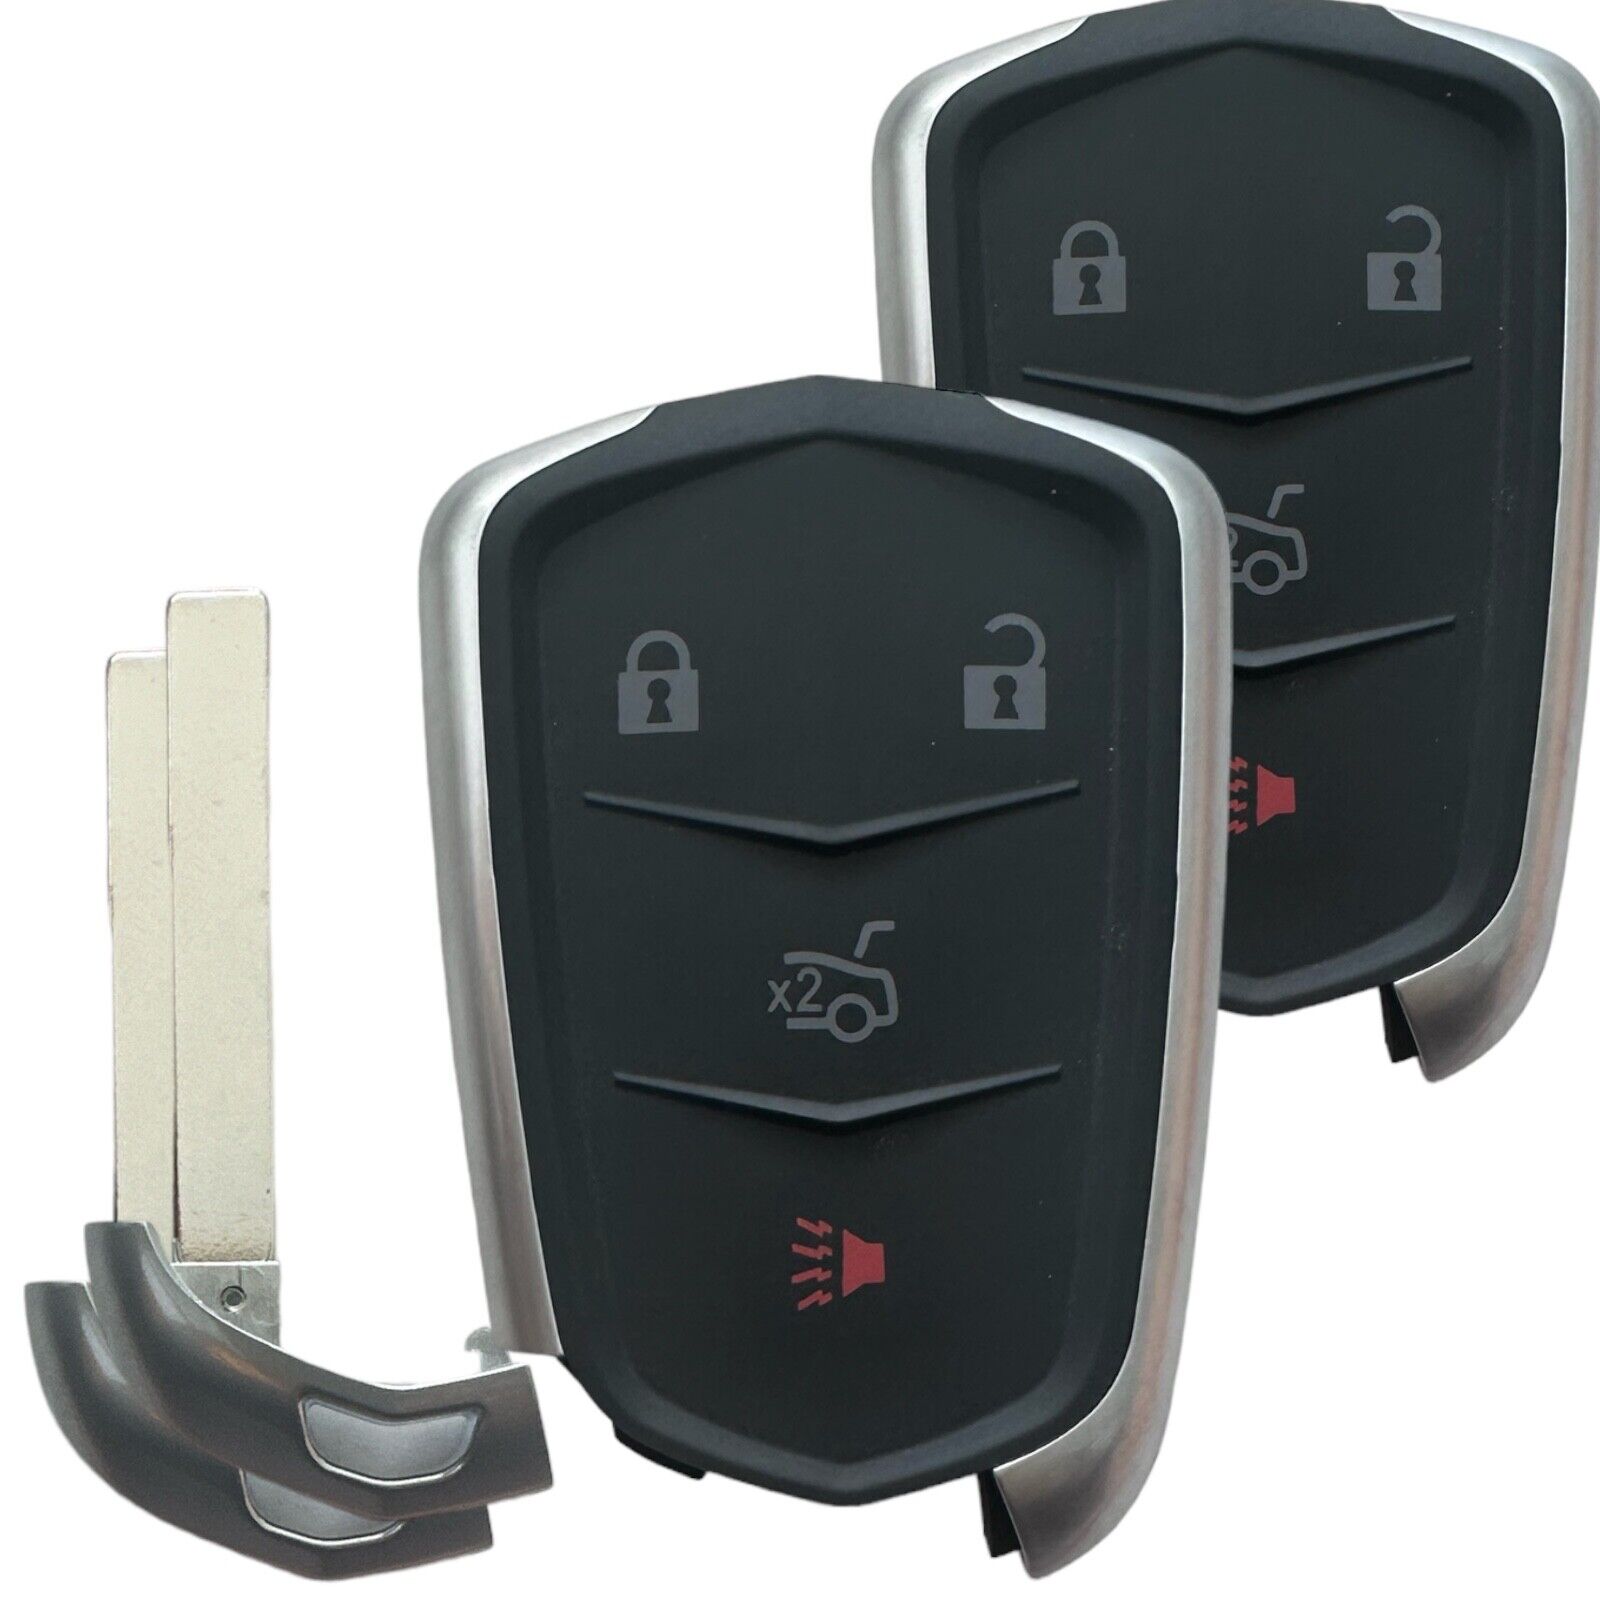 2 New 2014-2019 Cadillac CTS Remote Transmitter Fob W/ Uncut Blade - HYQ2AB